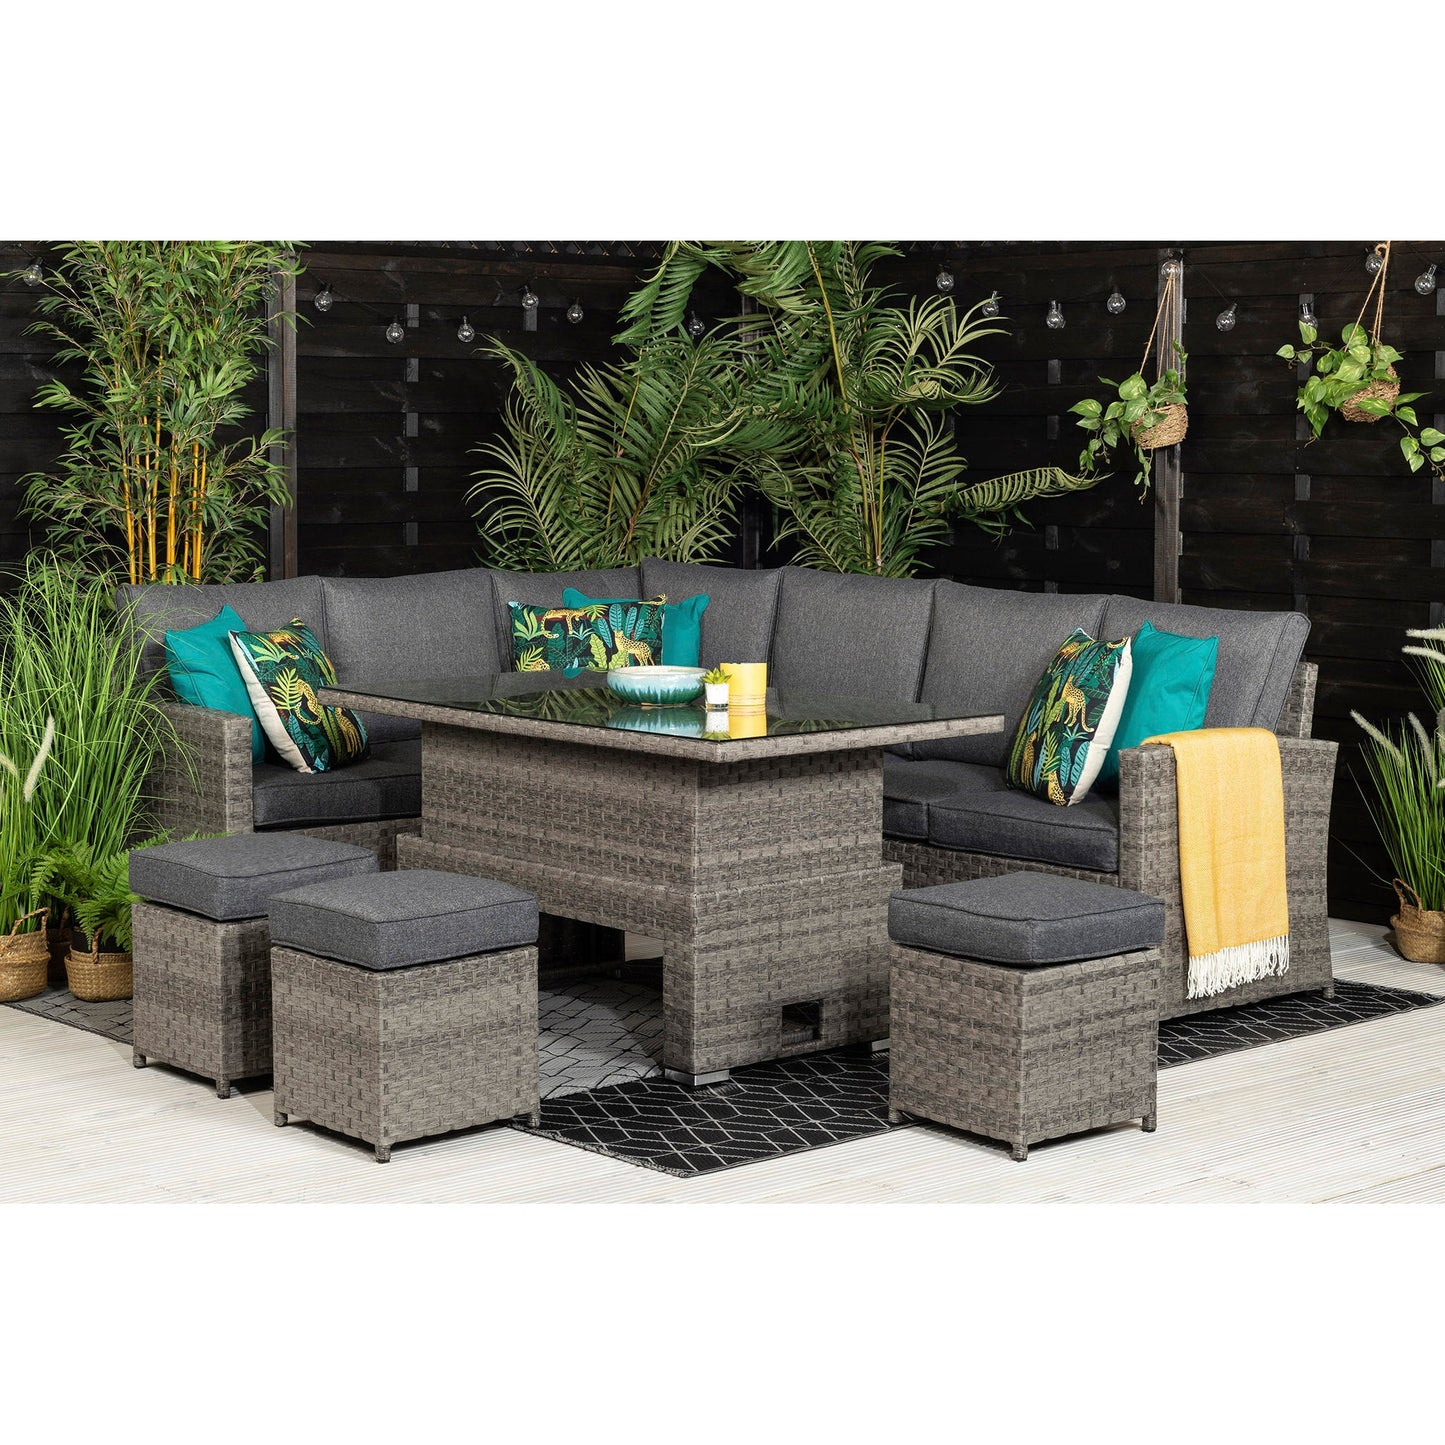 Melo Corner Sofa with Rising Table and 3 Stools in Grey Rattan - Italiancityfurniture